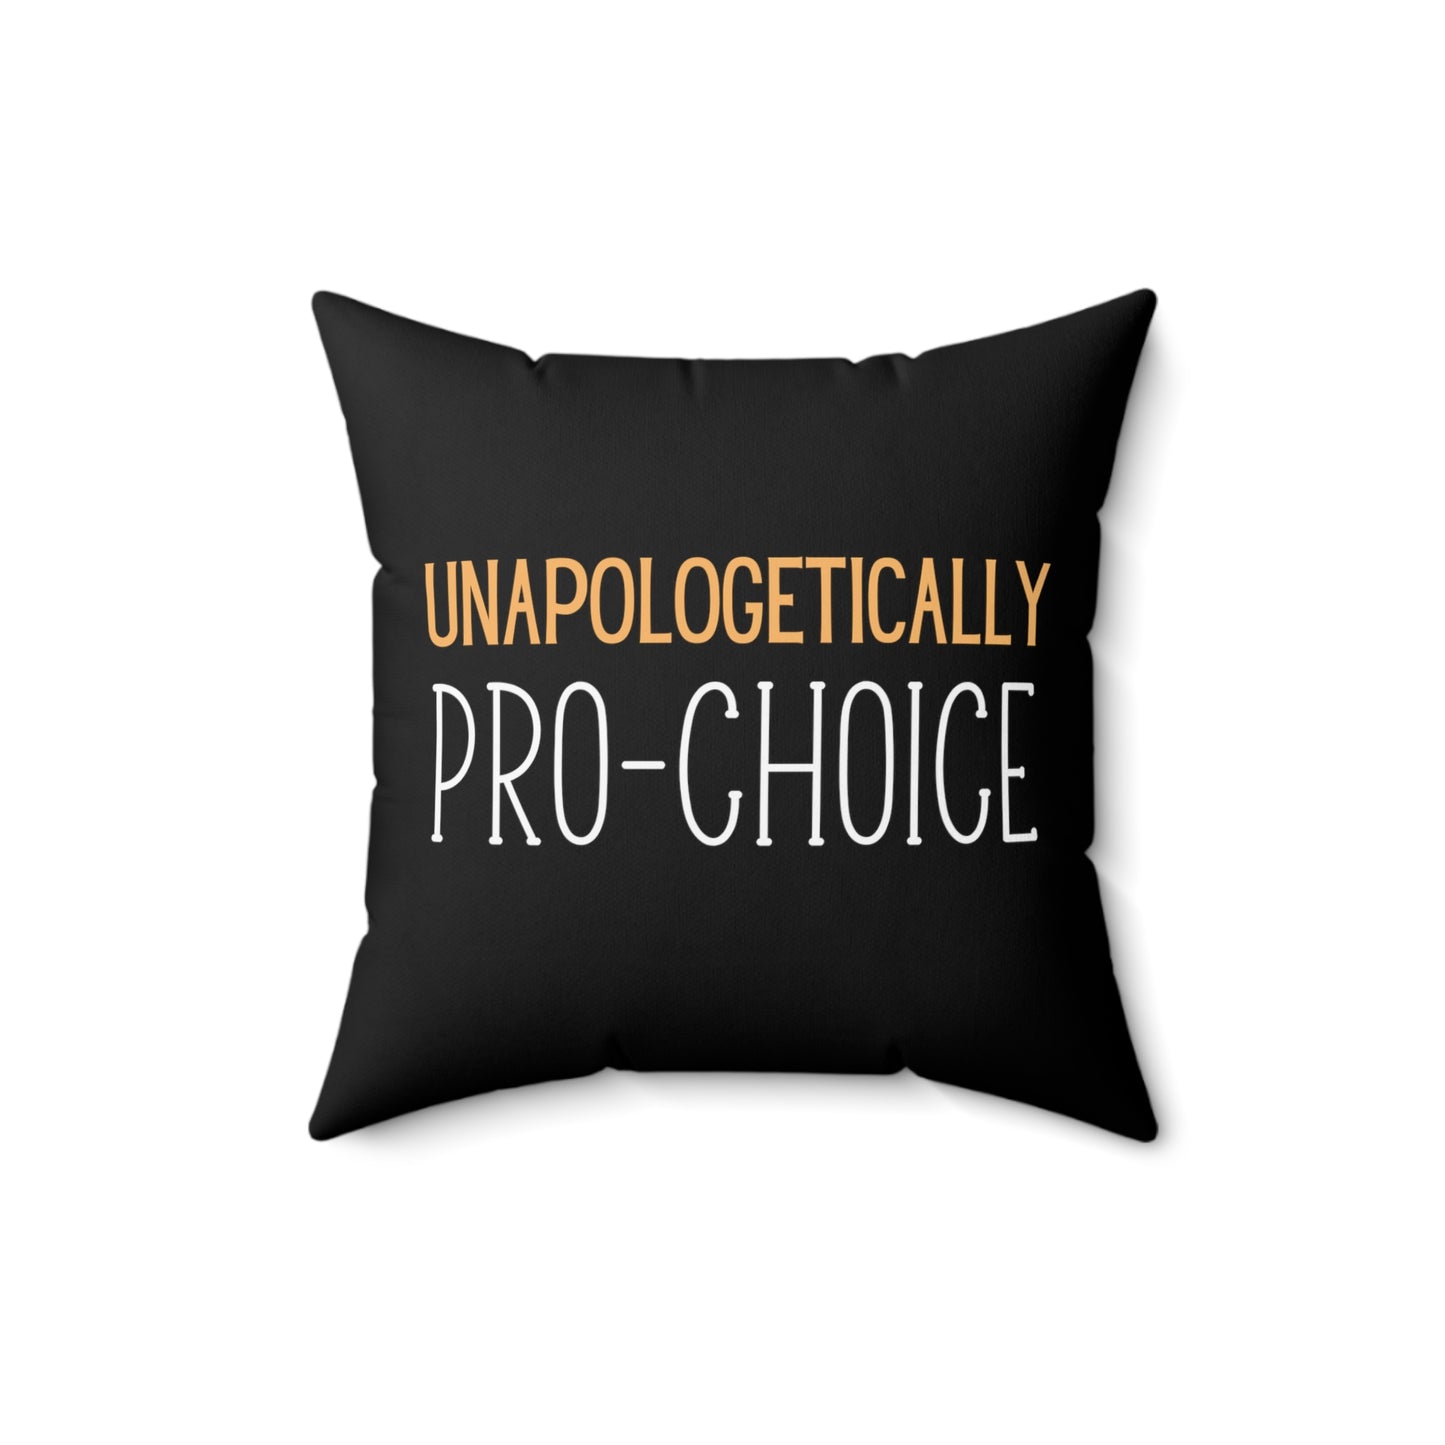 Pro-choice, pro women's healthcare, pro social justice. This throw pillow makes your support for women crystal clear.